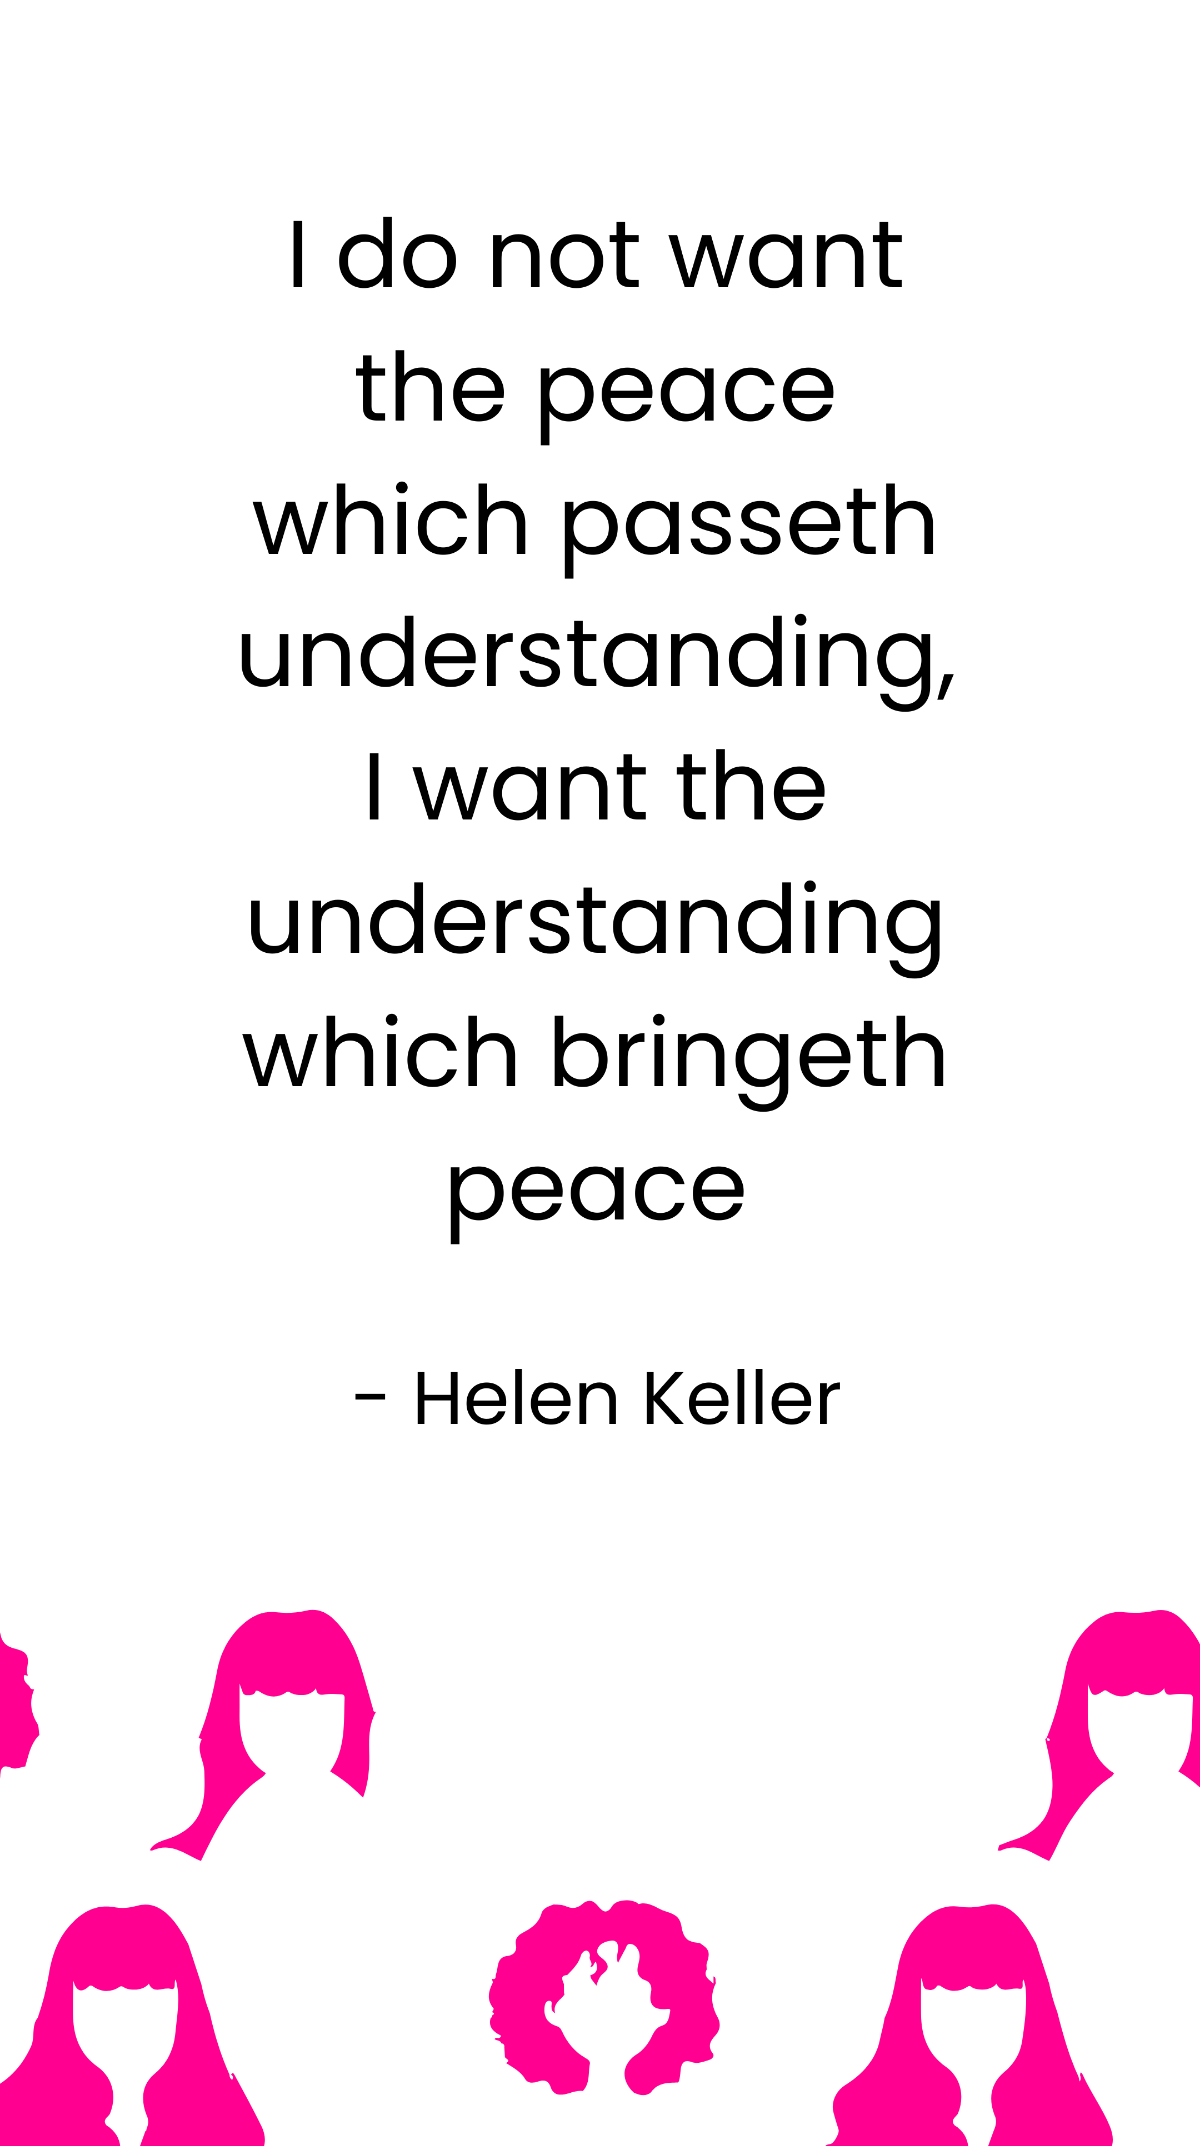 Helen Keller - I do not want the peace which passeth understanding, I want the understanding which bringeth peace Template